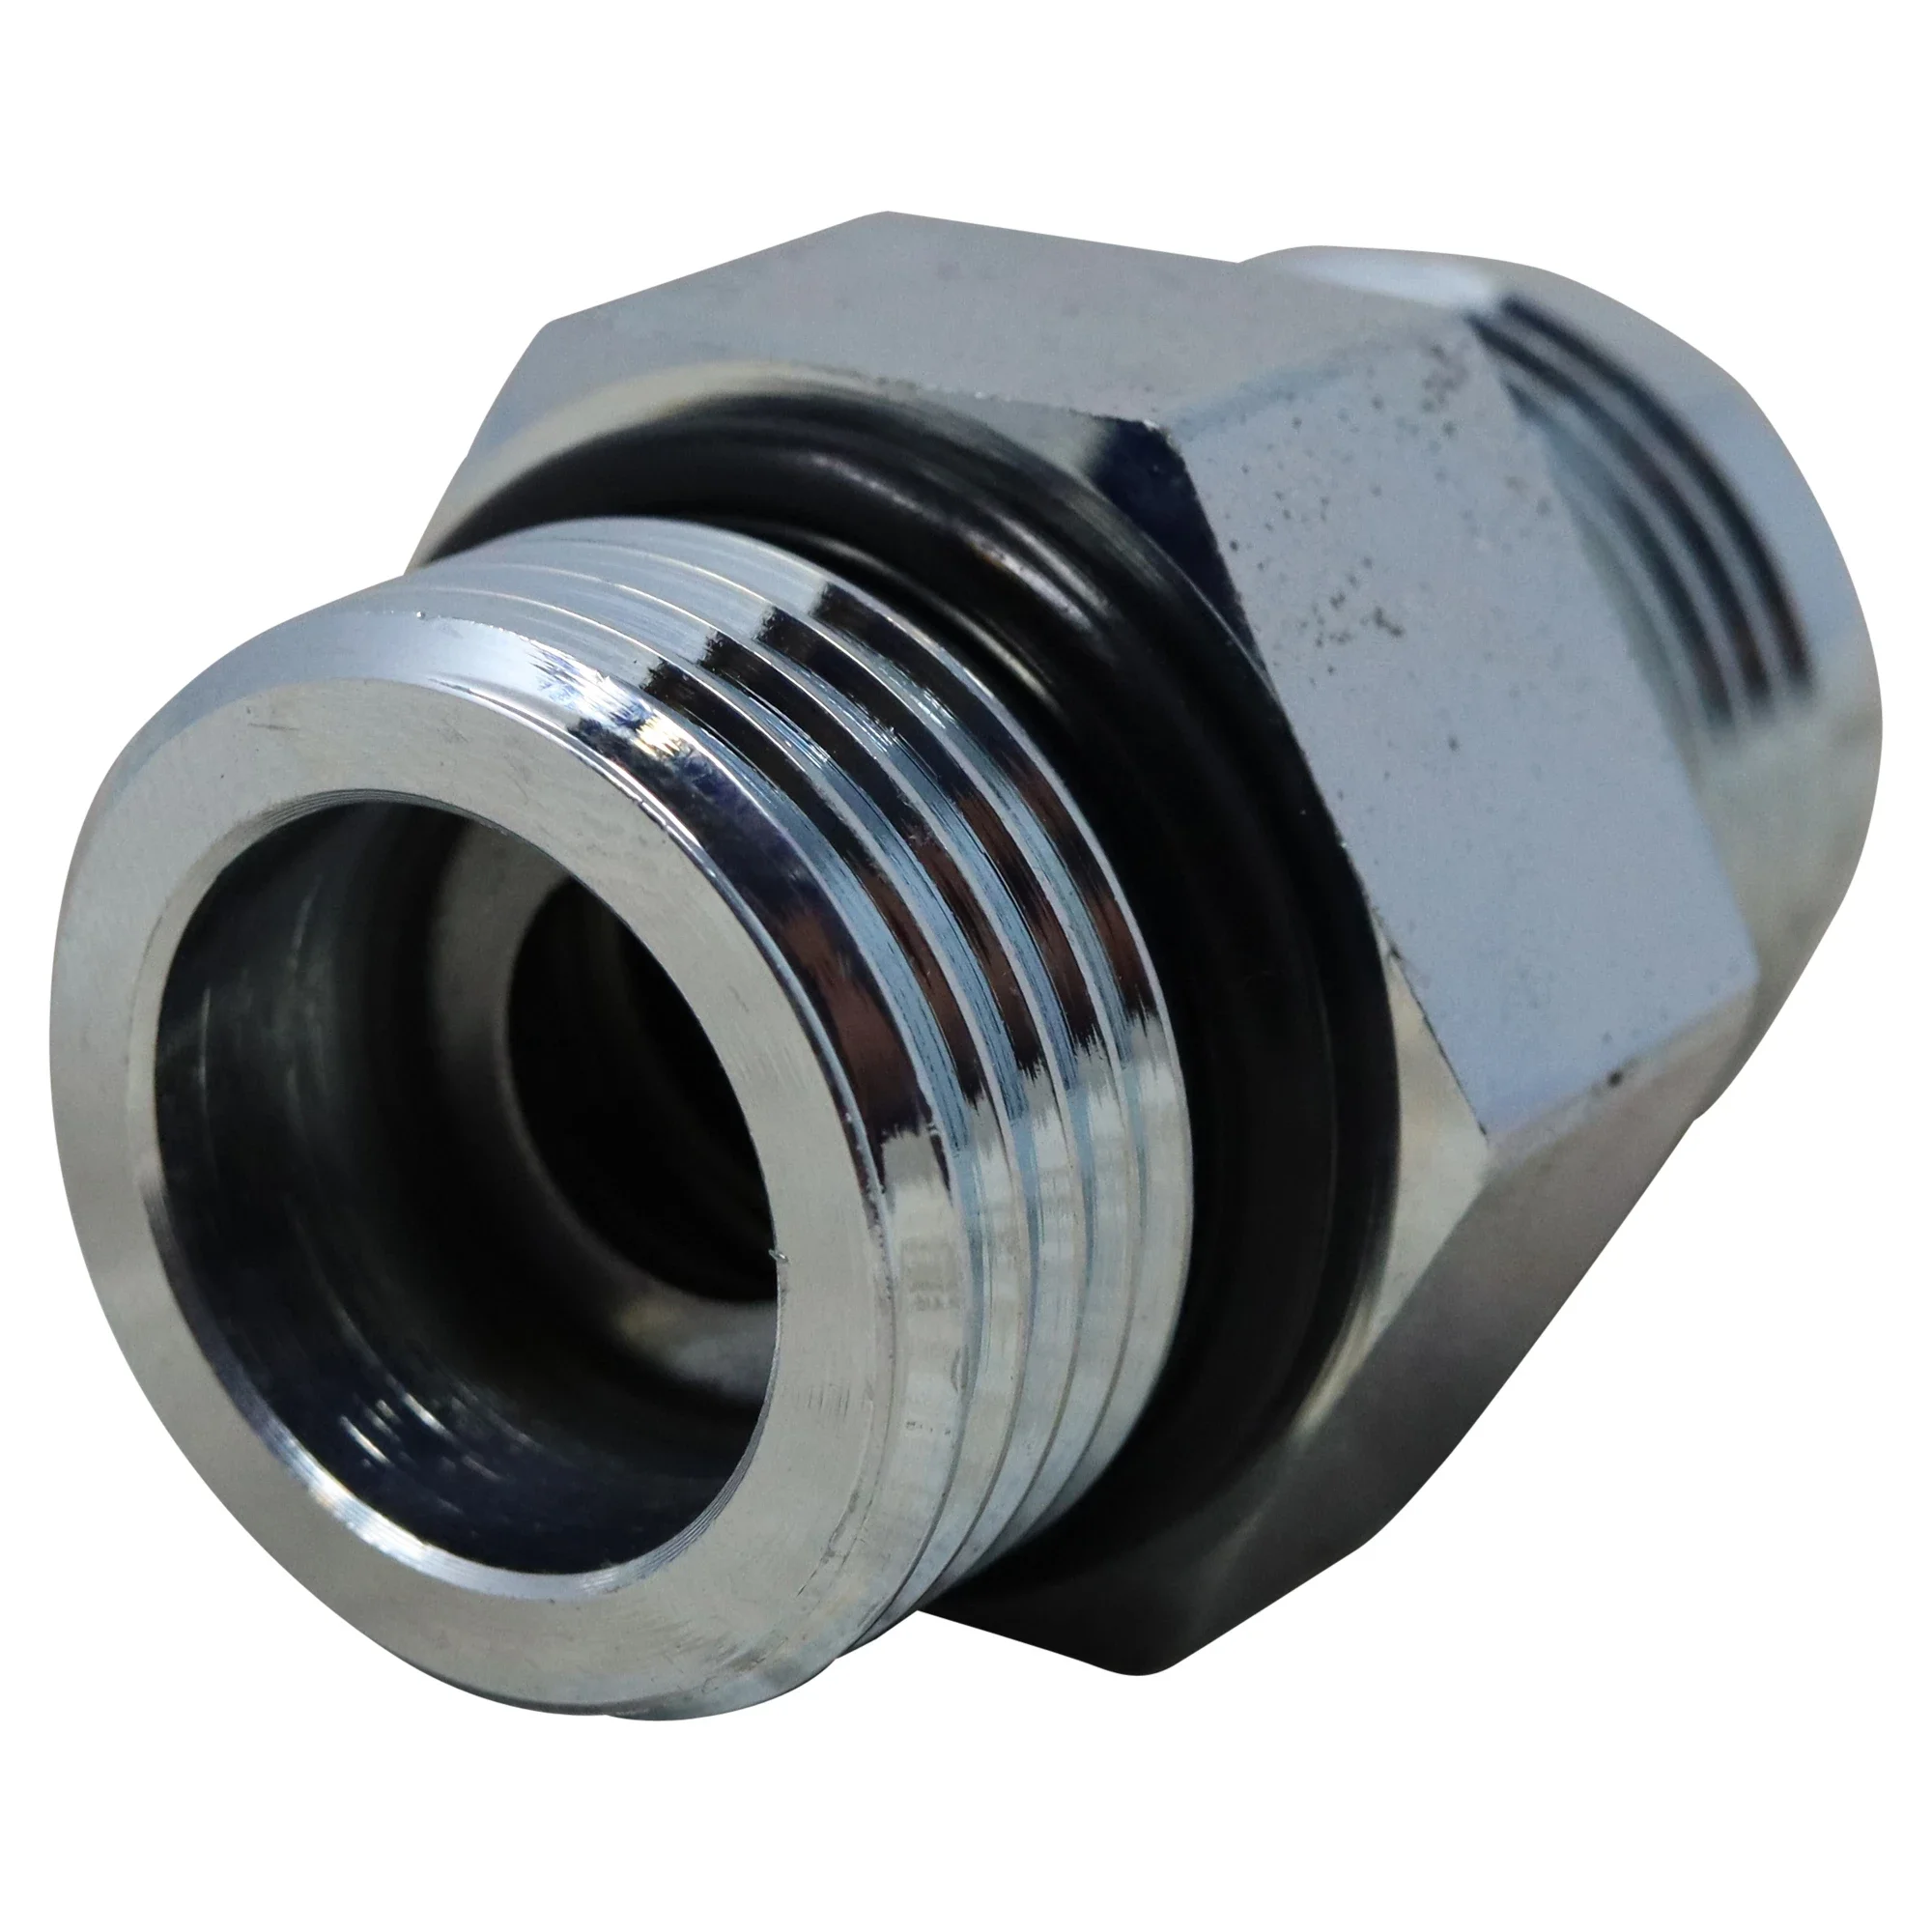 Wastebuilt® Replacement for Curotto-Can Check Valve Fitting